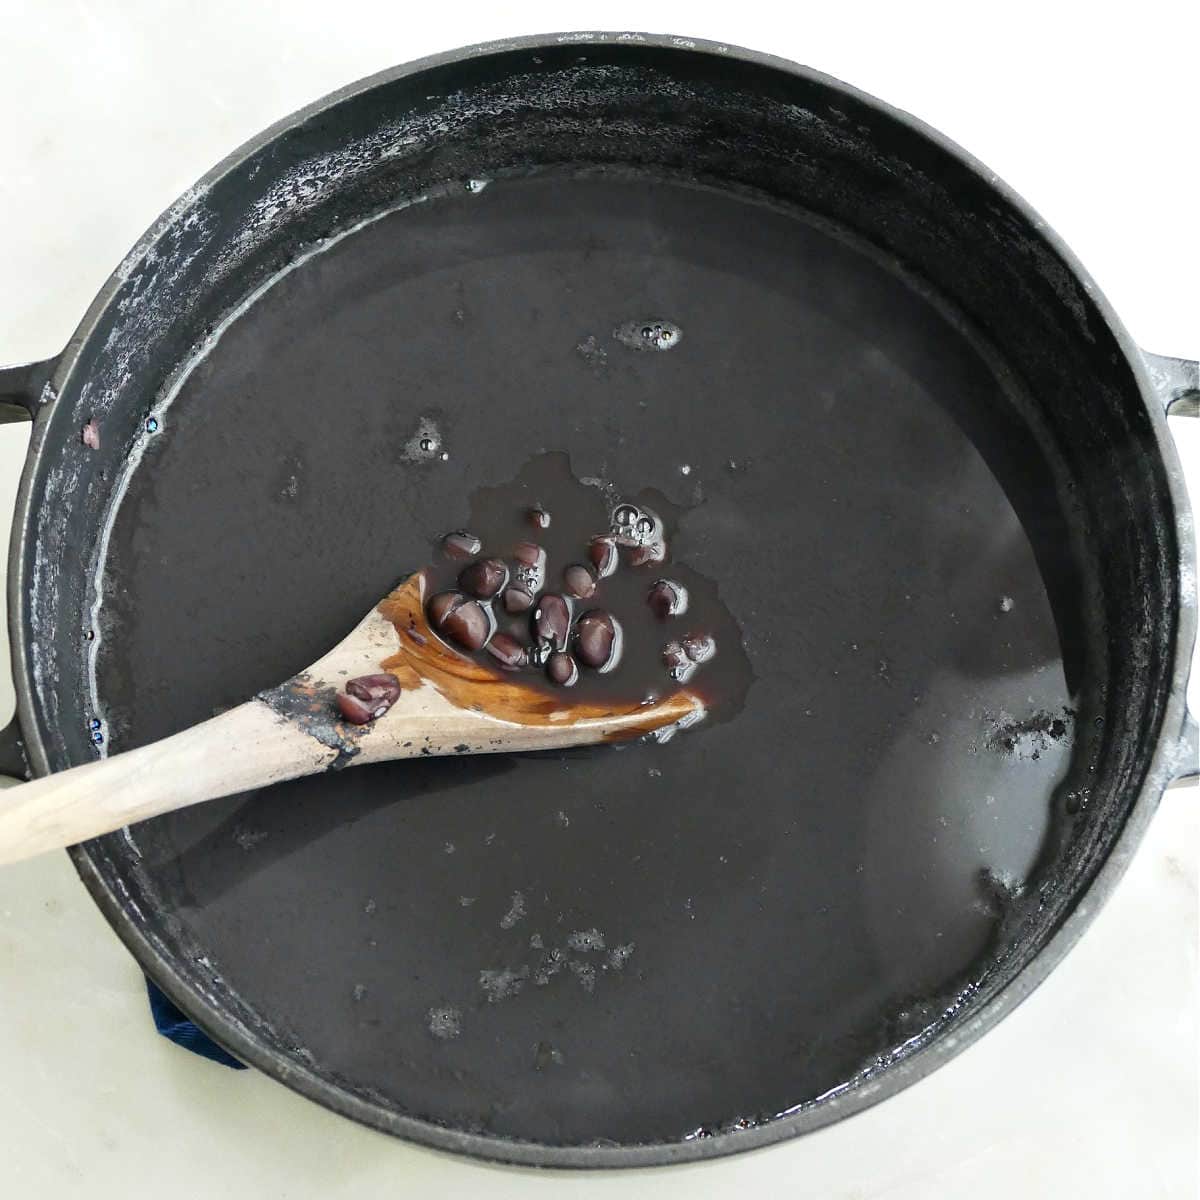 Stirring the black beans in a pot with a wooden spoon.